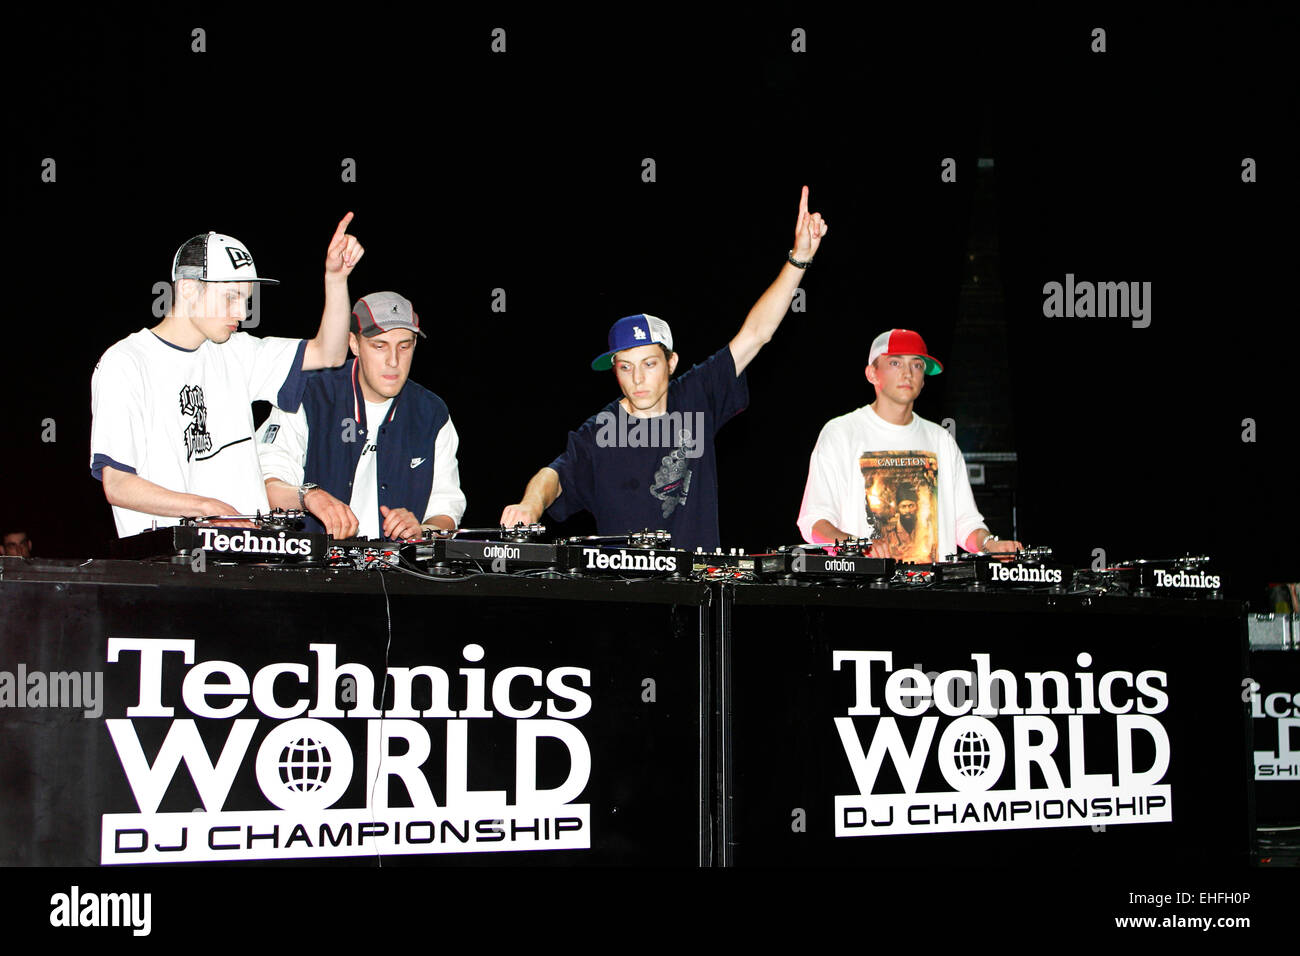 Lordz of Fitness from Germany DJing in the Team Championships at the DMC/Technics World DJ Championships at Hammersmith Apollo. Stock Photo